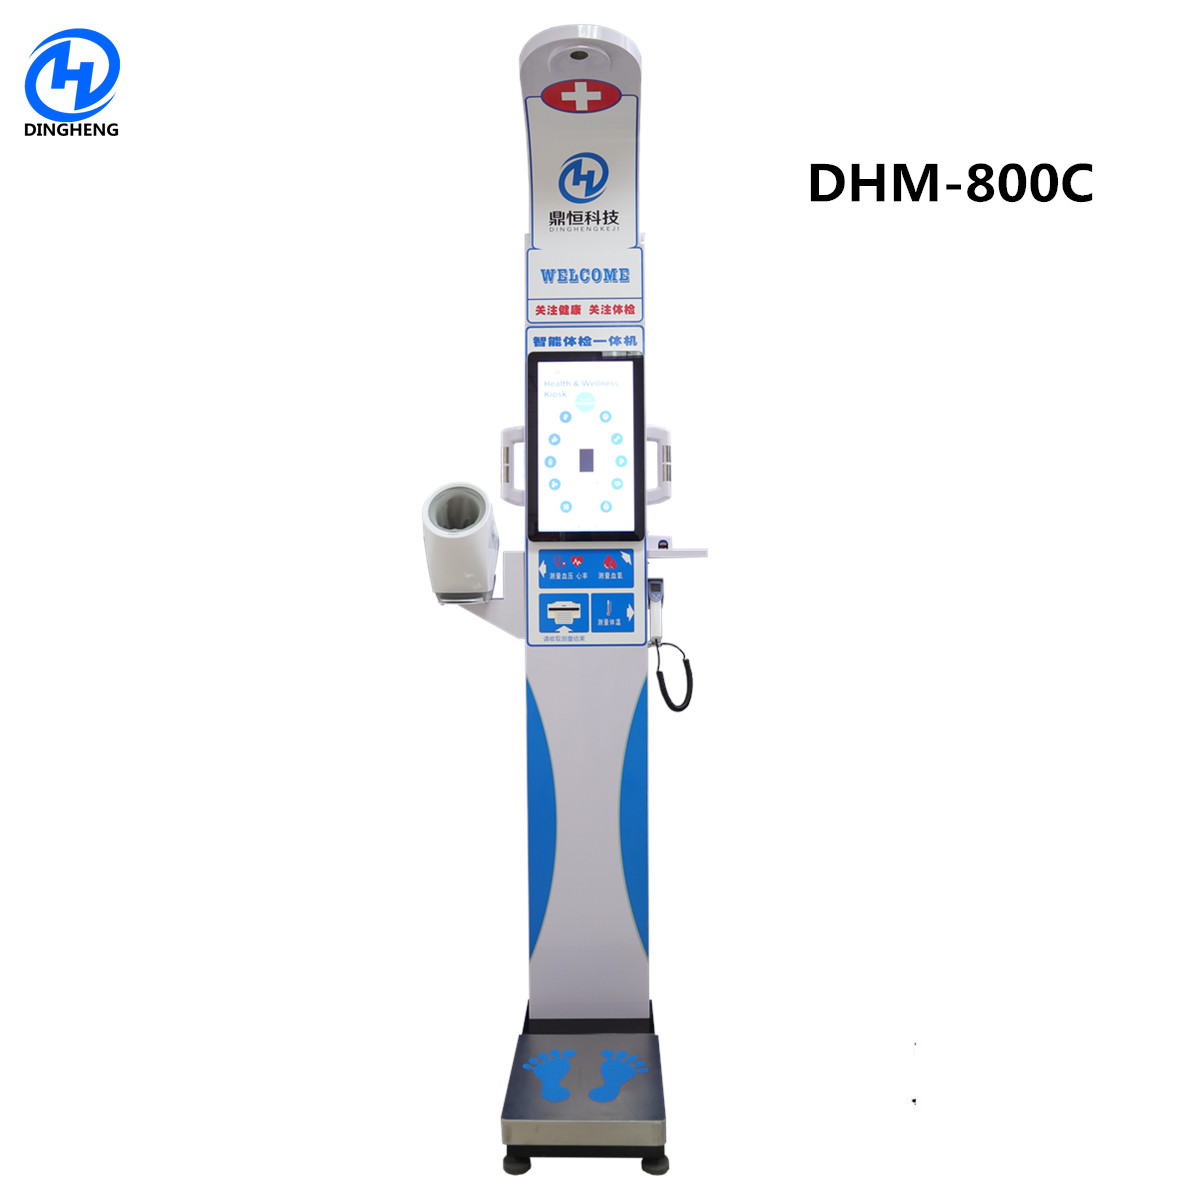 Quality DHM-800c ultrasonic probe for height measurement adjust the height of blood pressure monitor health checkup station for sale